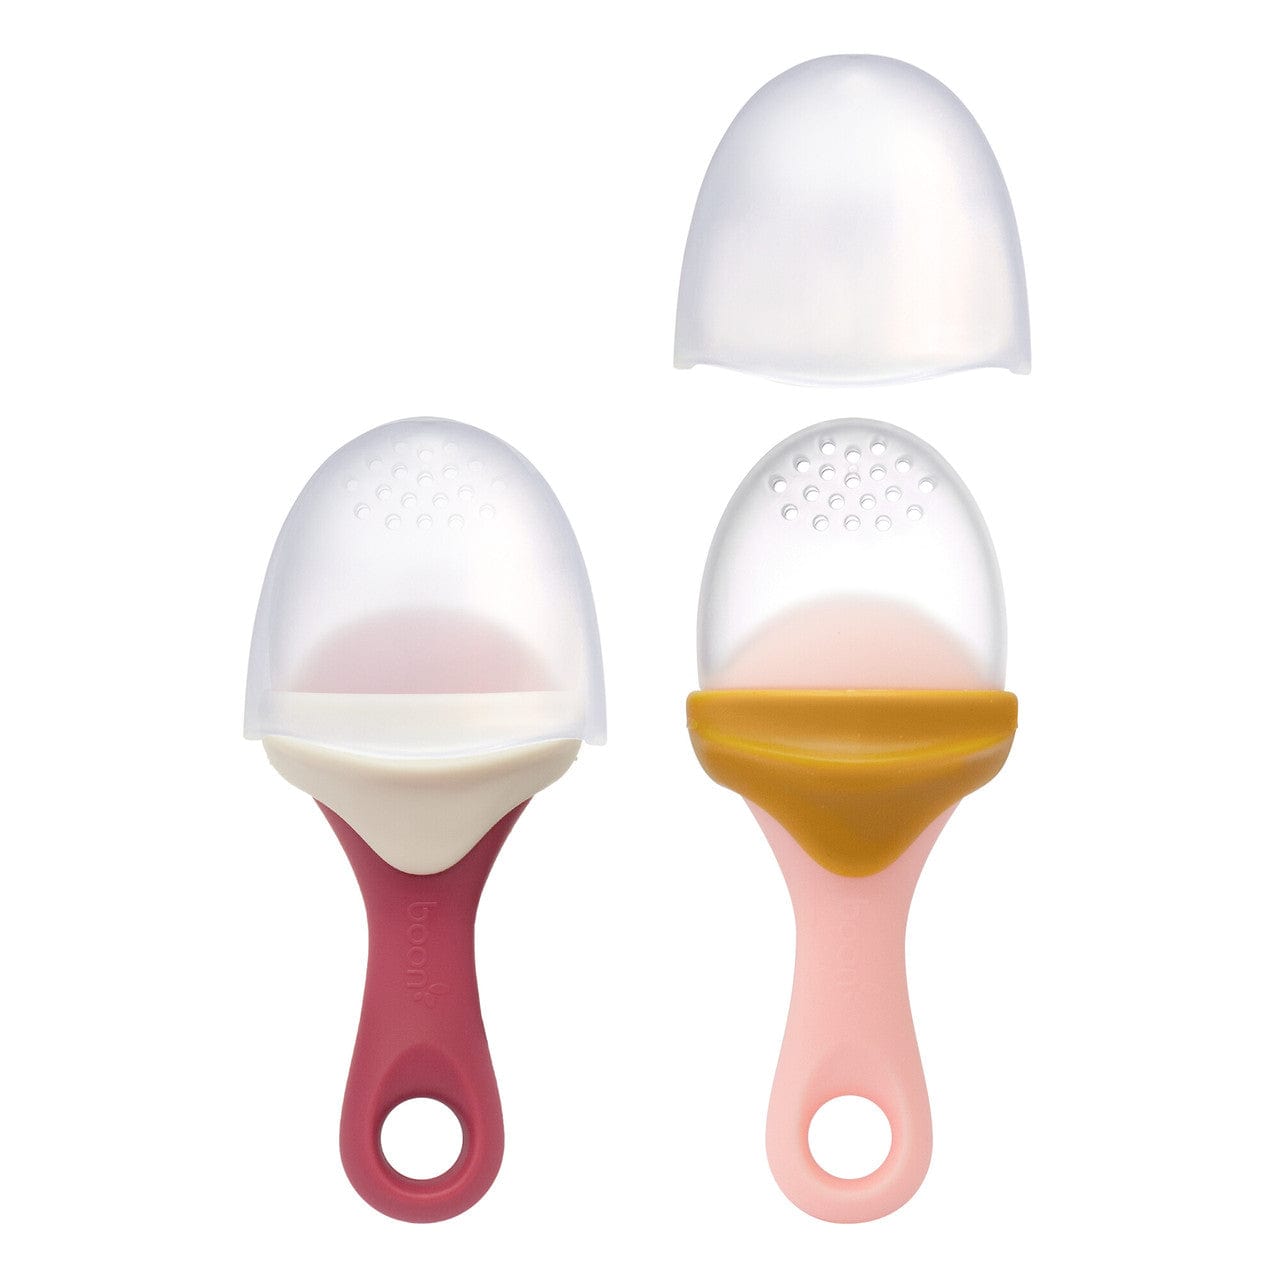 Boon feeder Boon PULP Silicone Teething Feeder 2 PK - PINK/Mustard and Mauve/Ivory